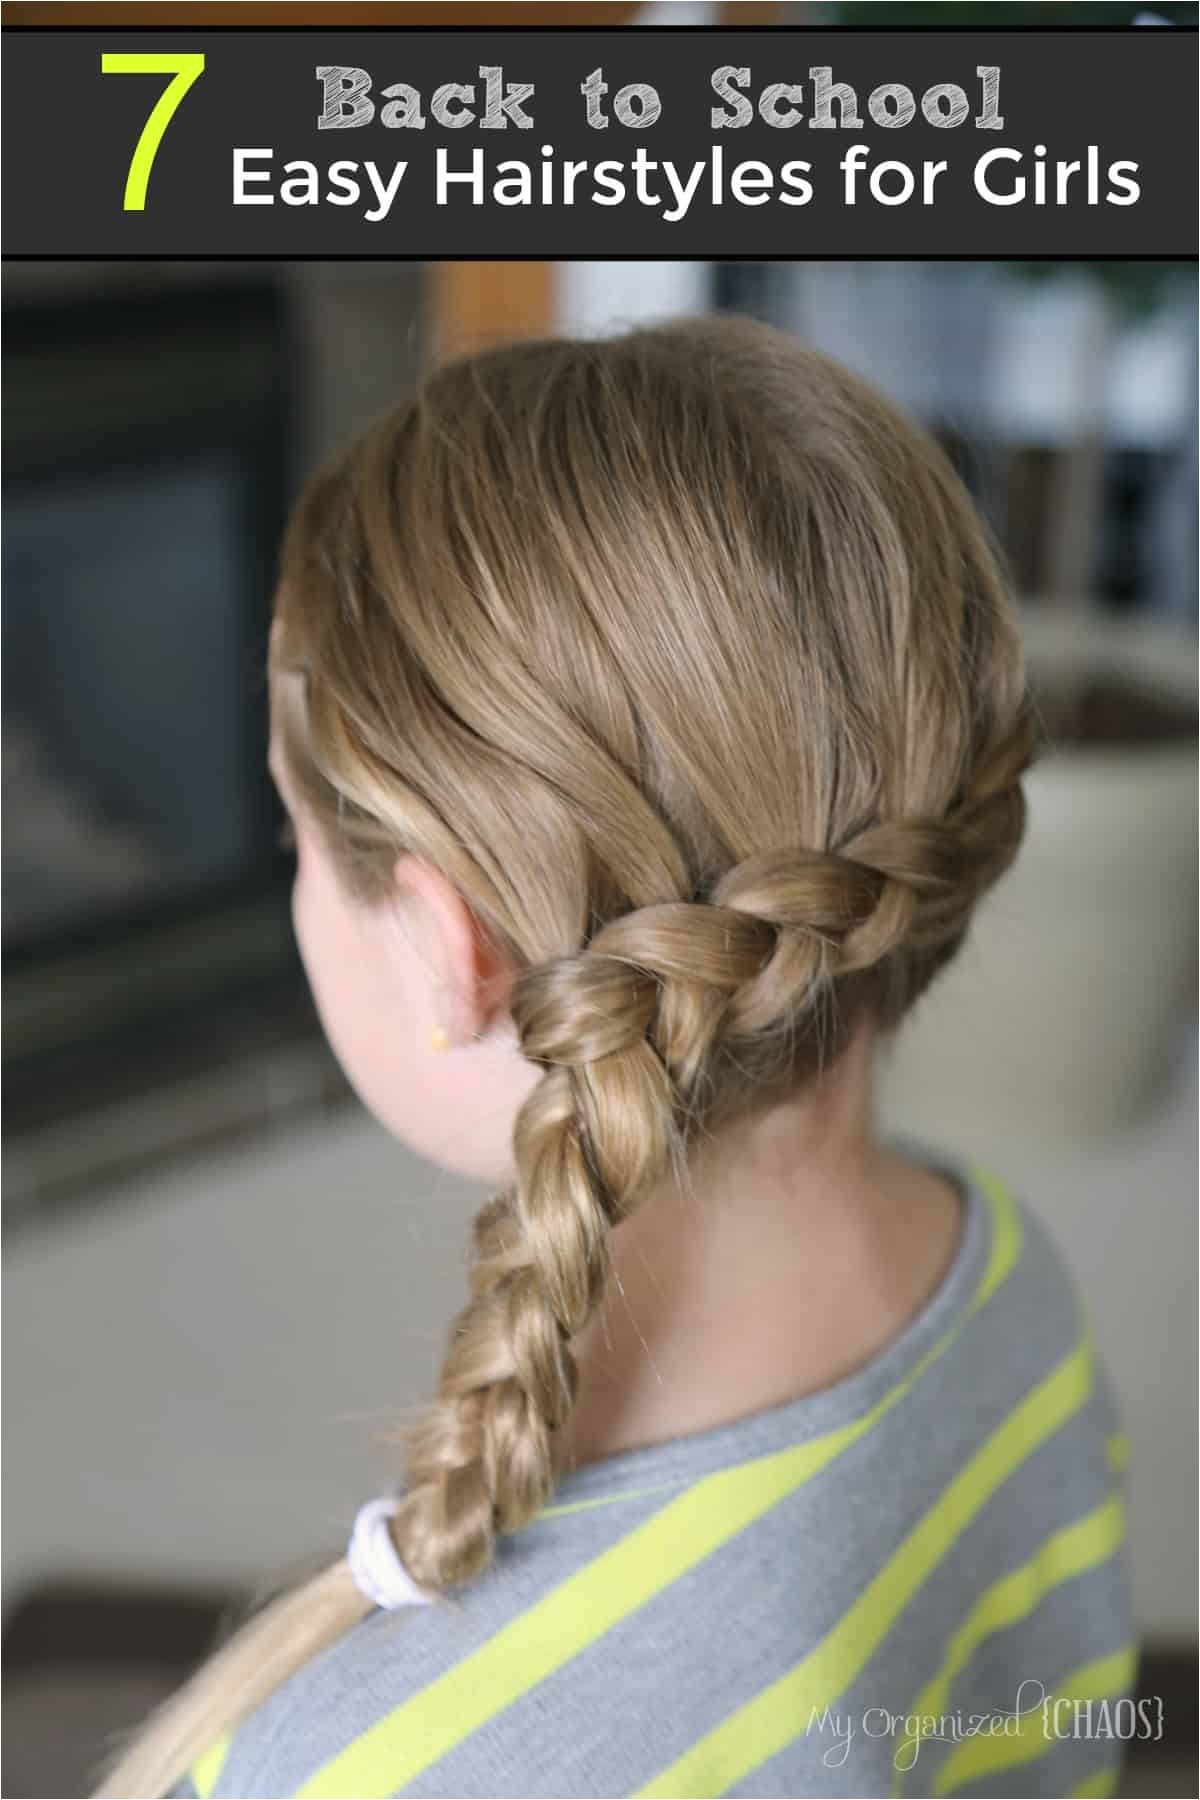 7 back to school easy hairstyles for girls